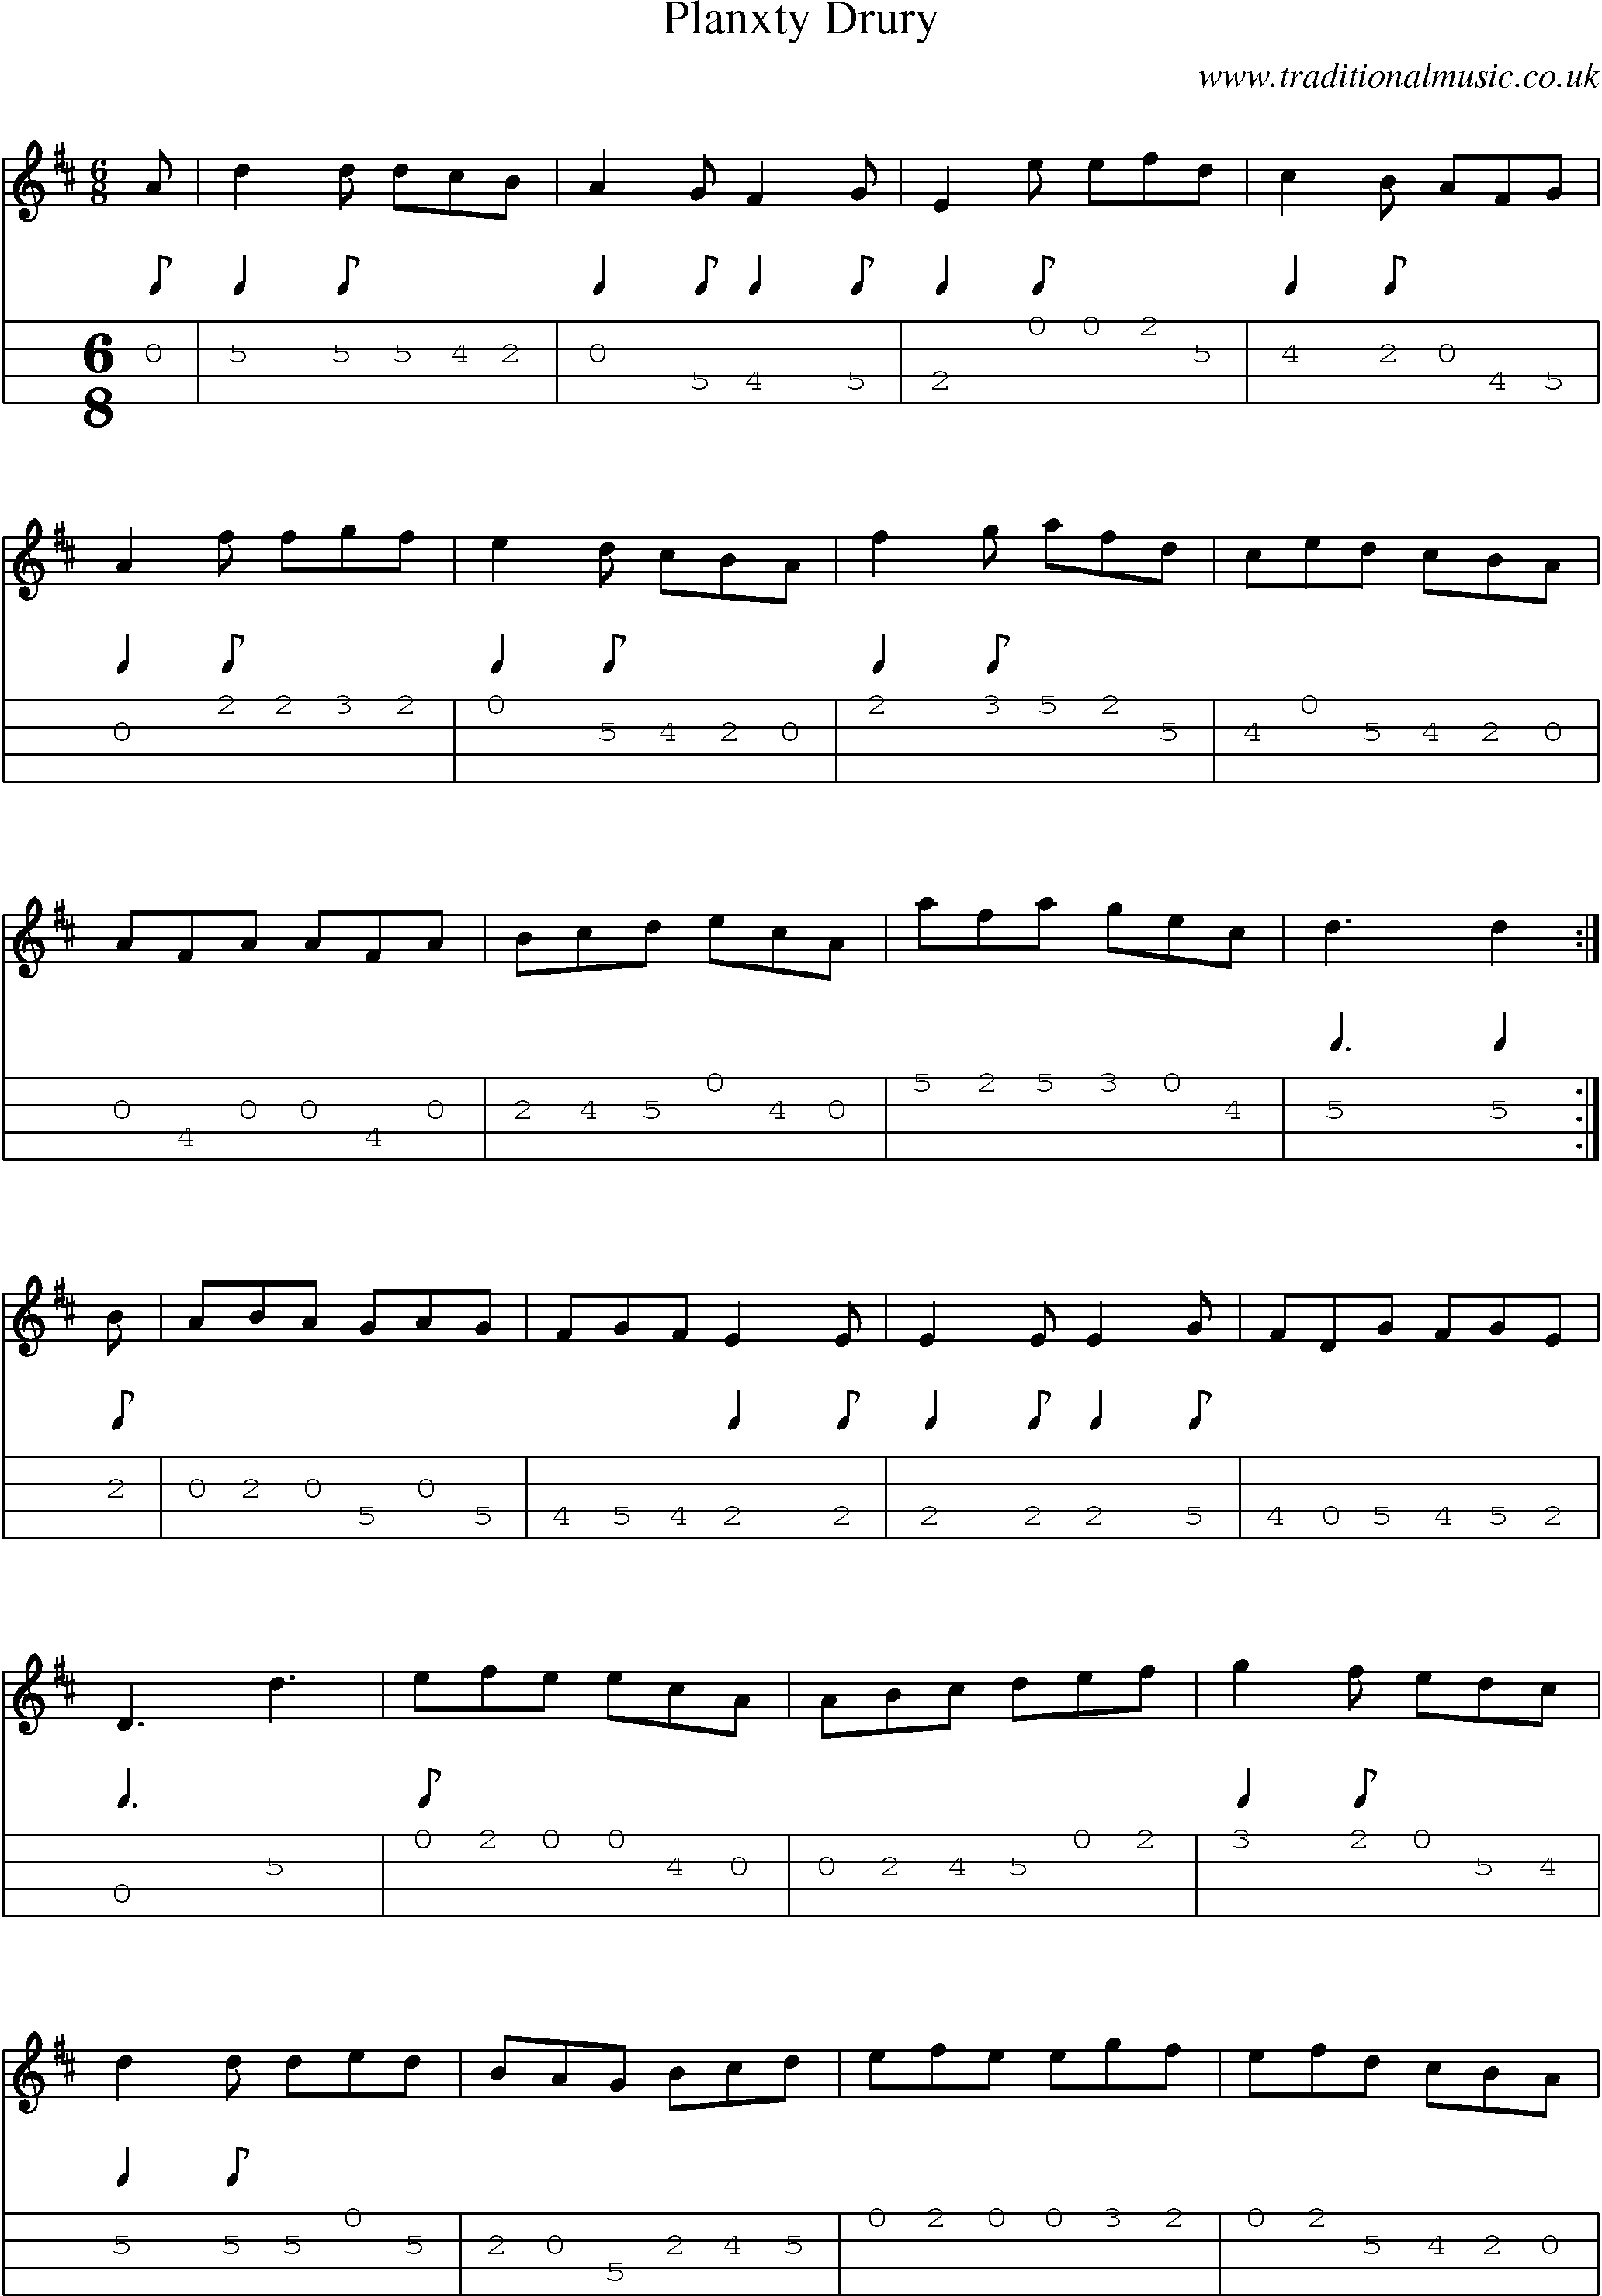 Music Score and Mandolin Tabs for Planxty Drury